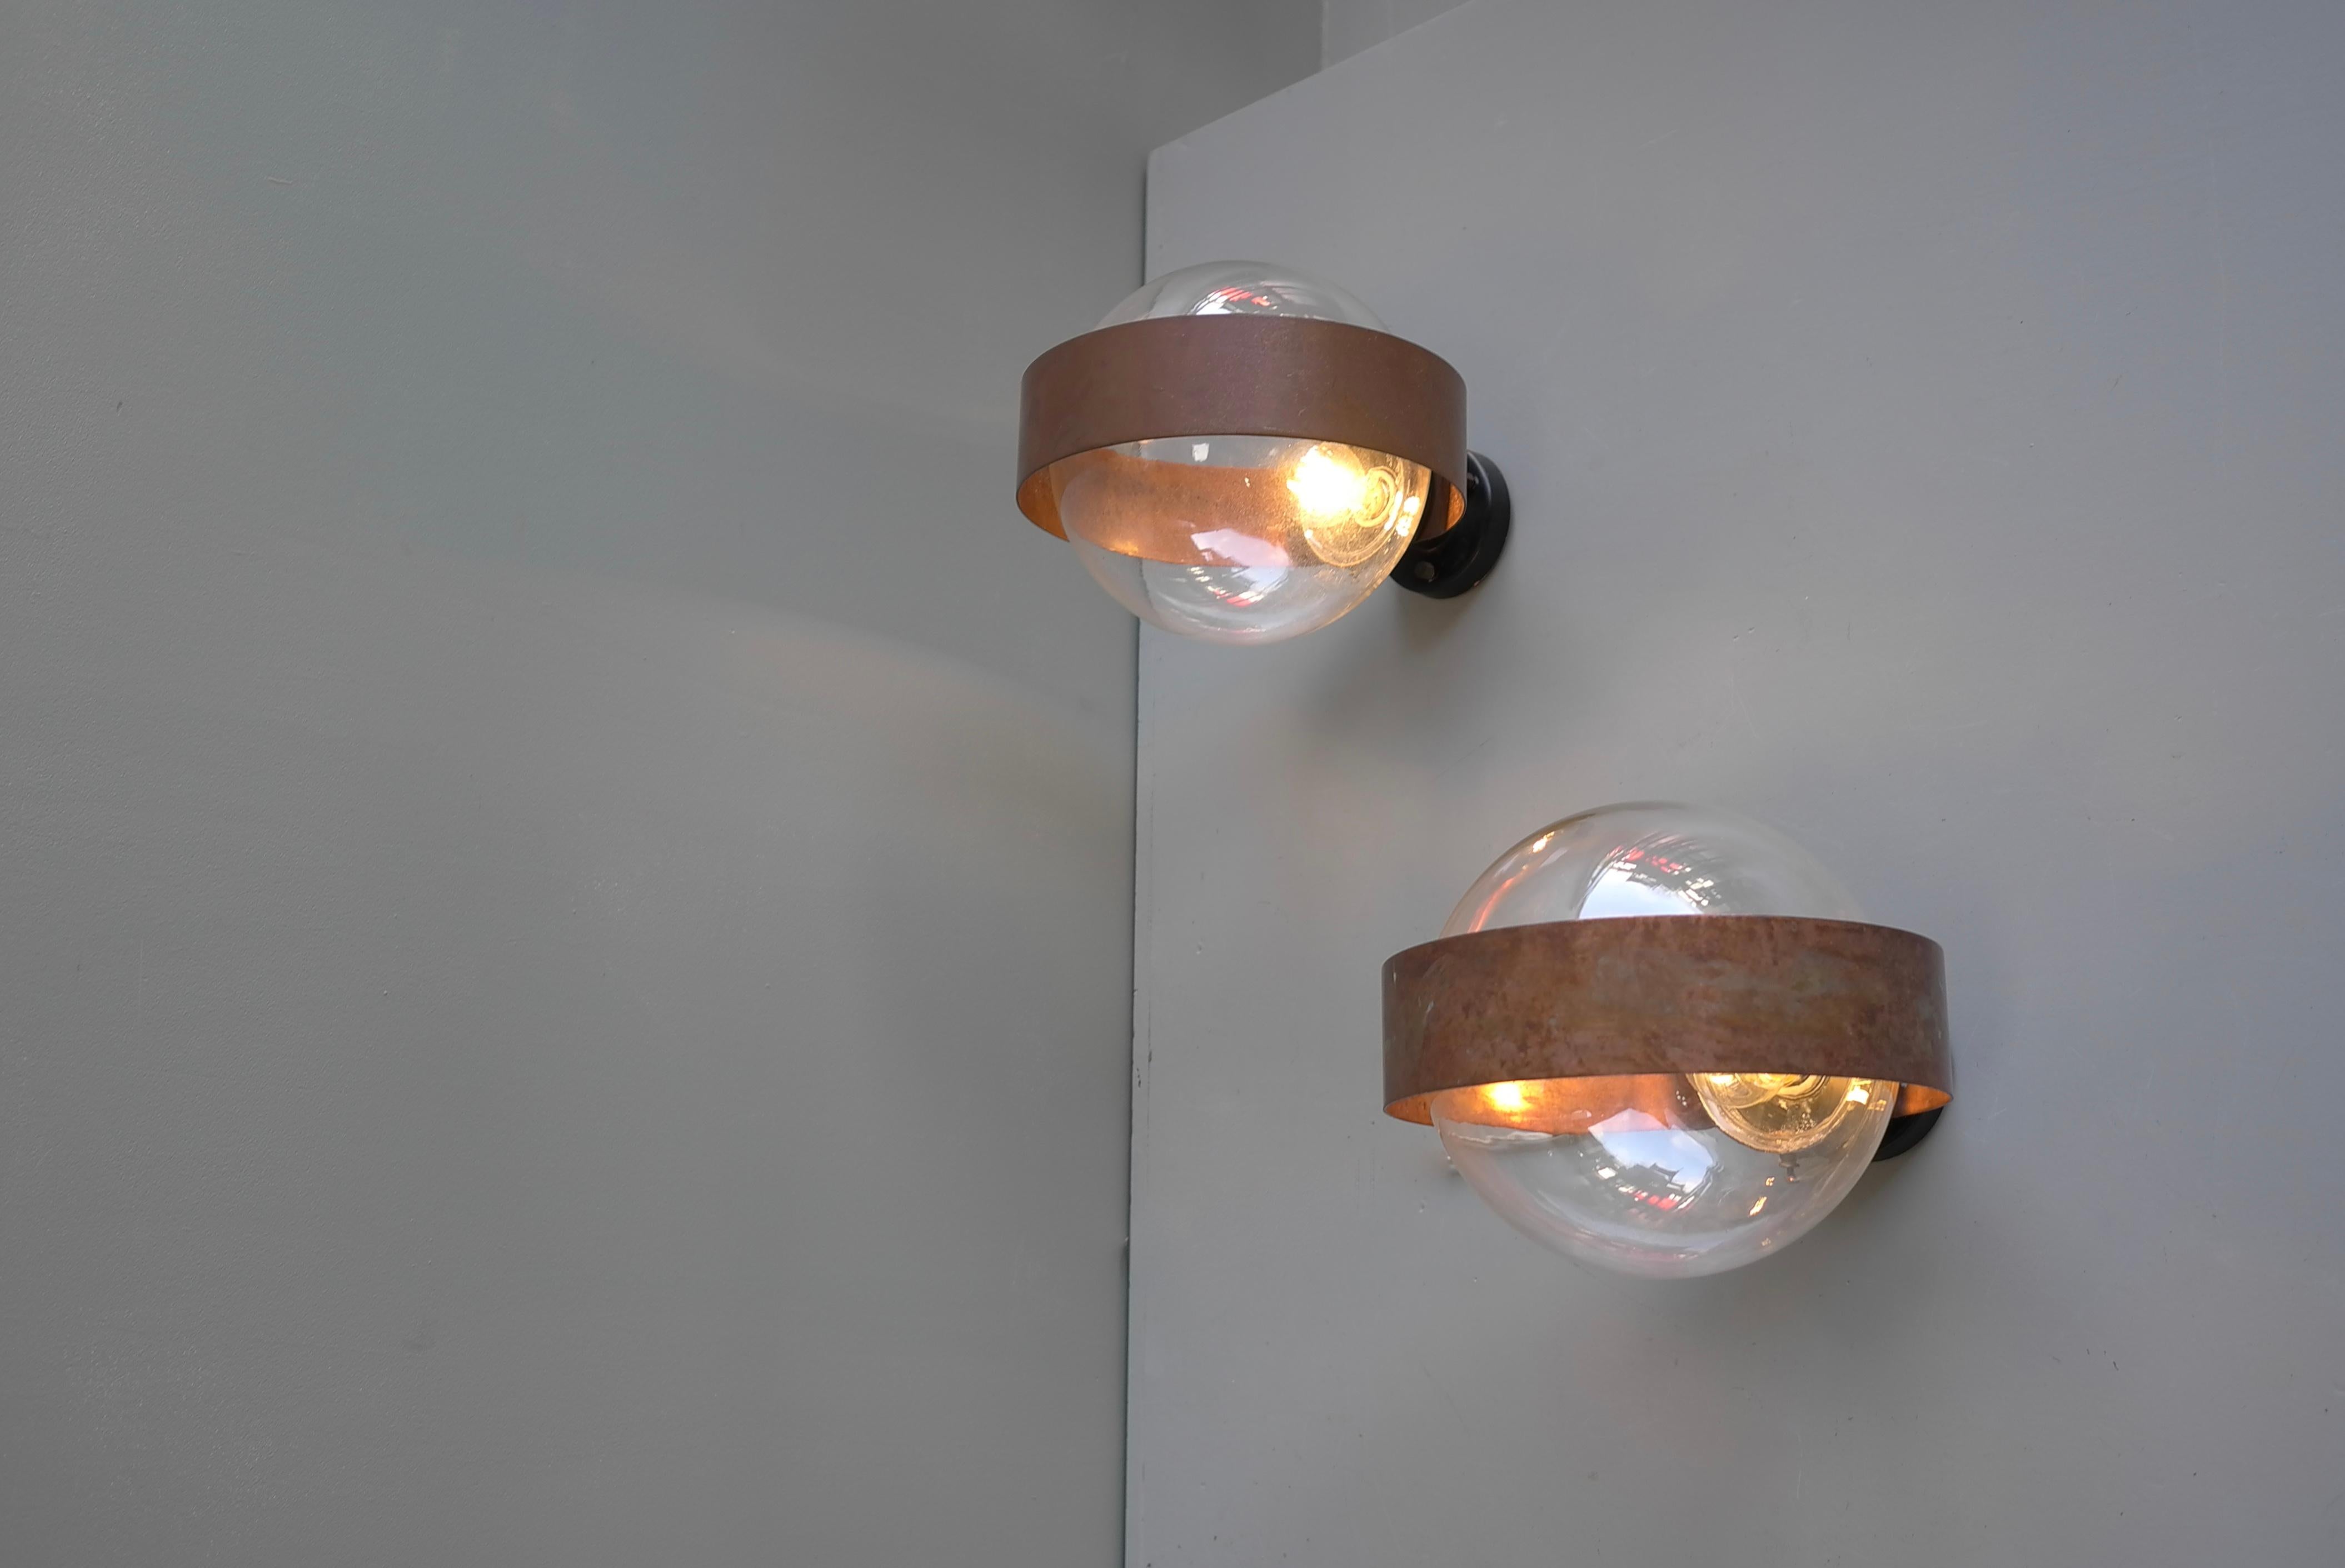 Mid-Century Modern Pair of Scandinavian Glass Ball Wall lamps with Copper Patina Rims, 1960's For Sale